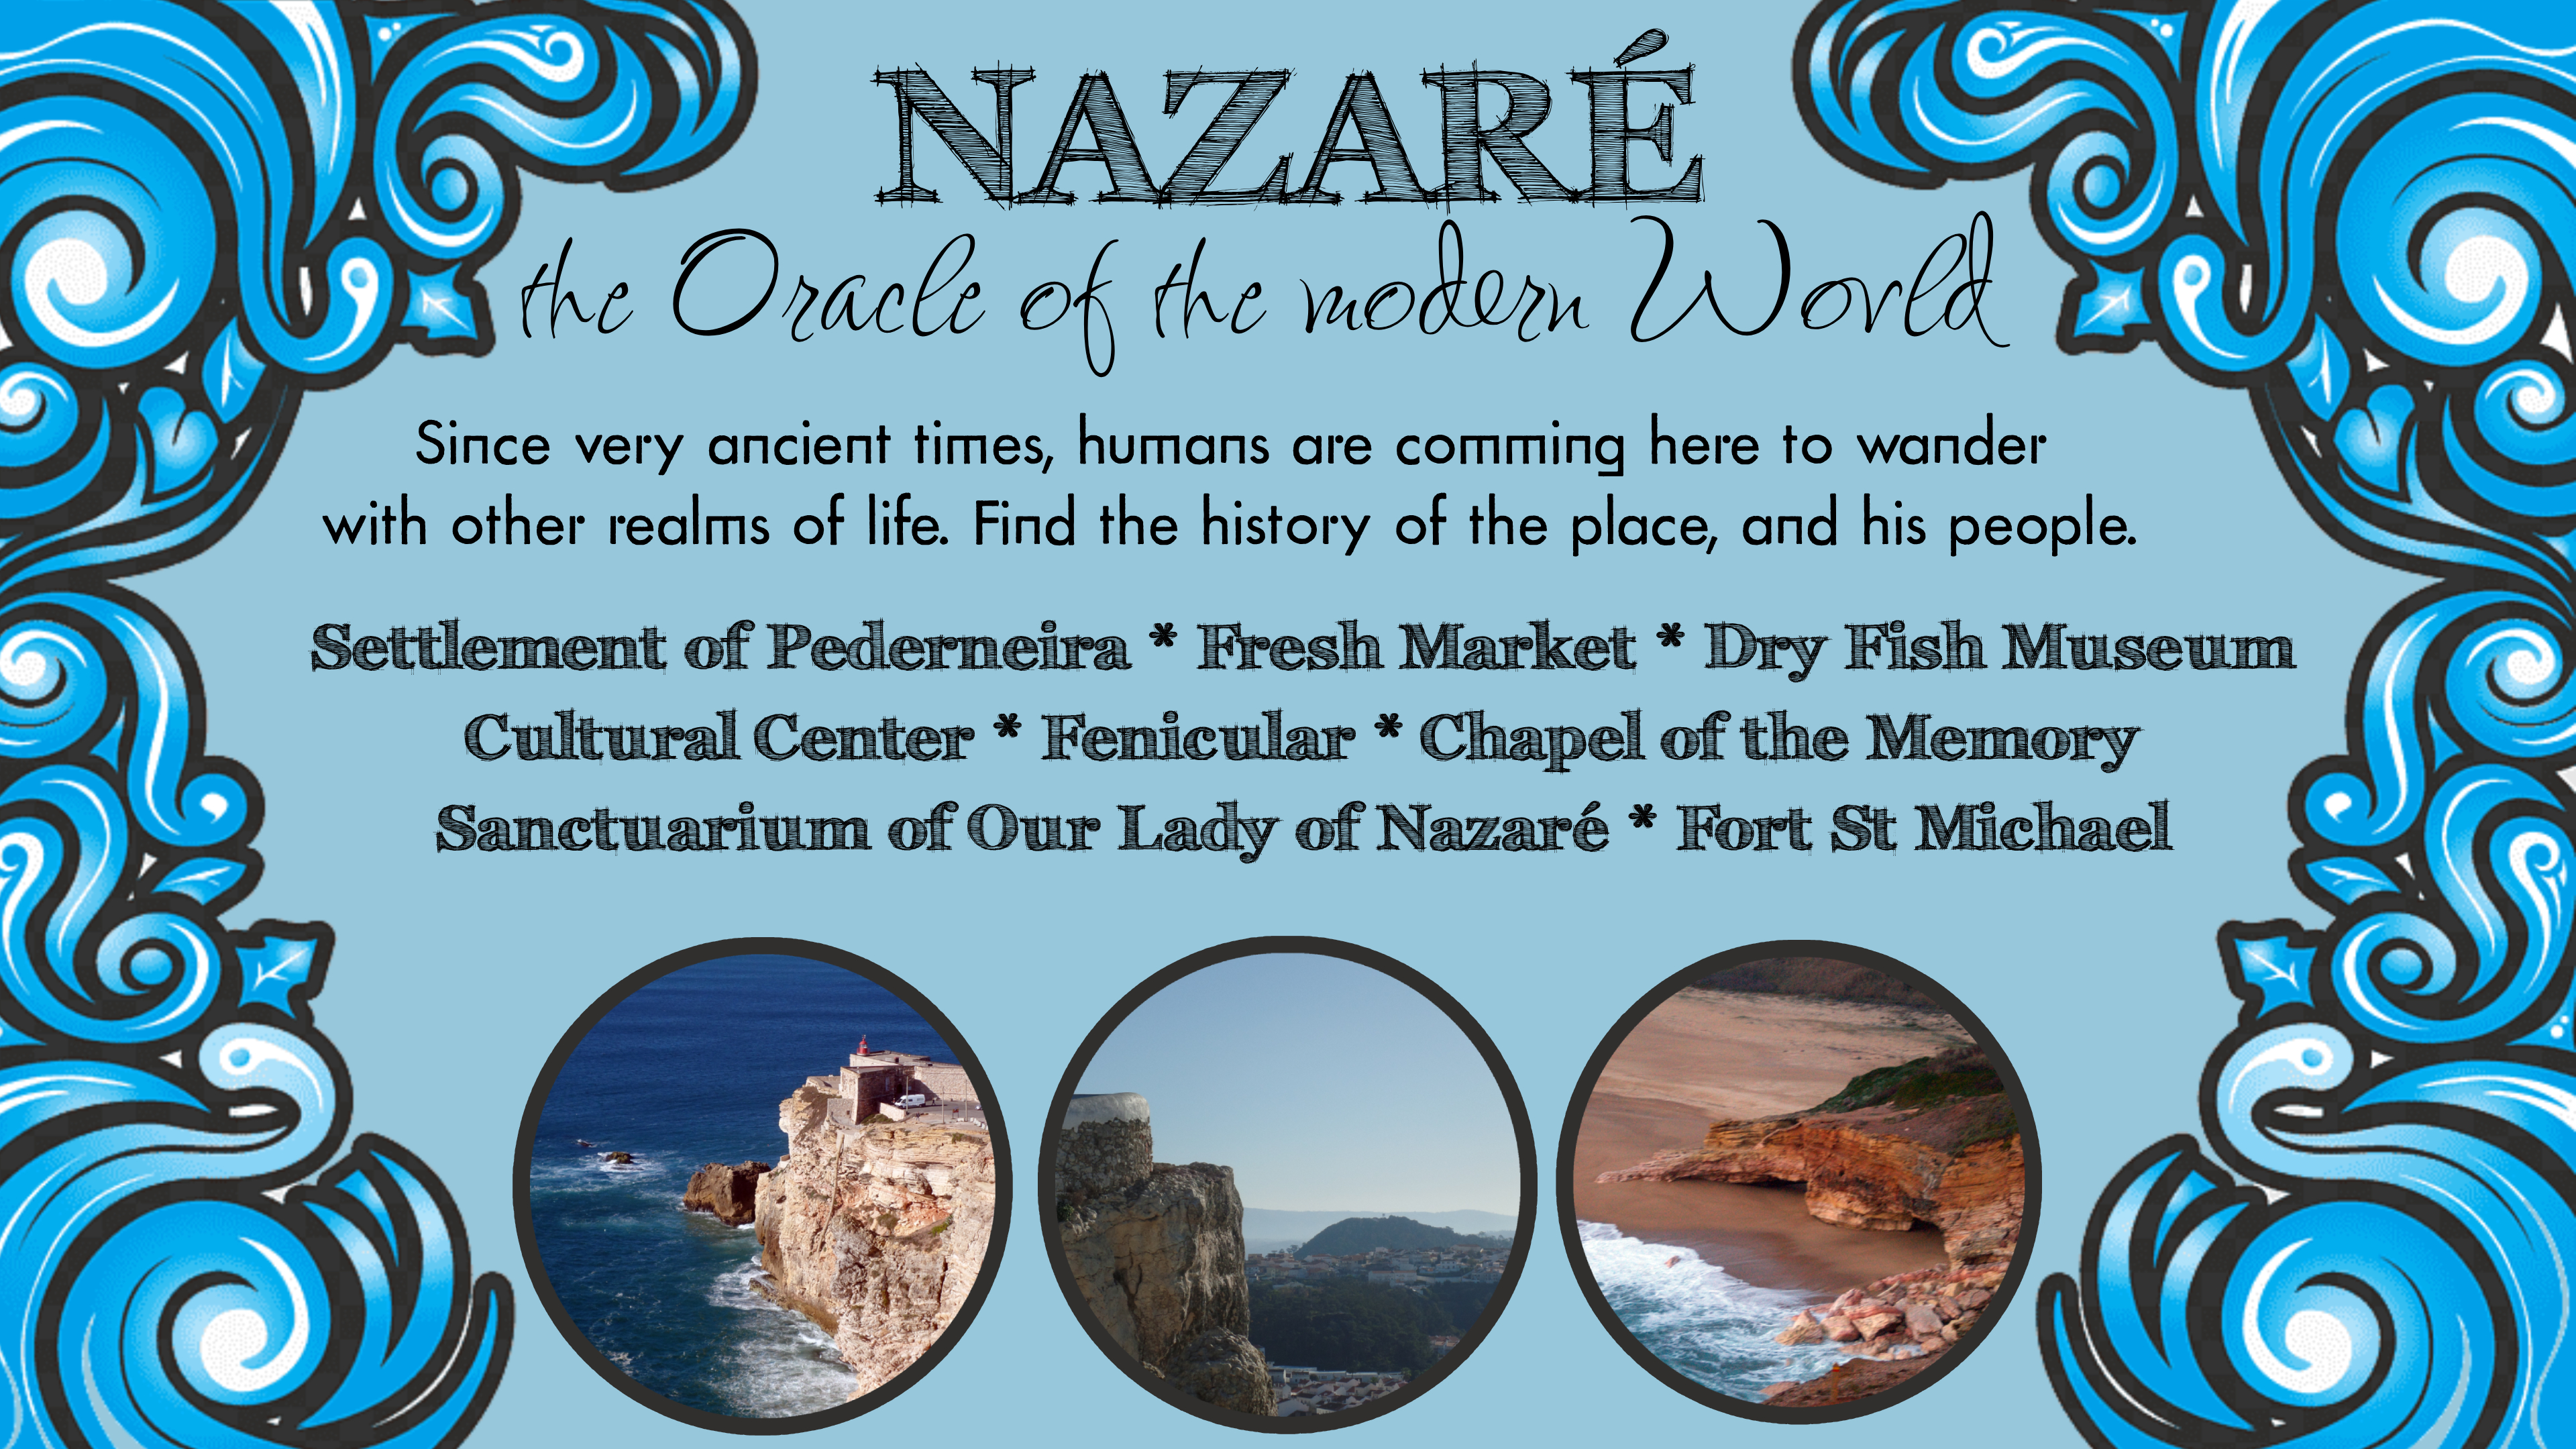 Nazare Oracle of the Modern World